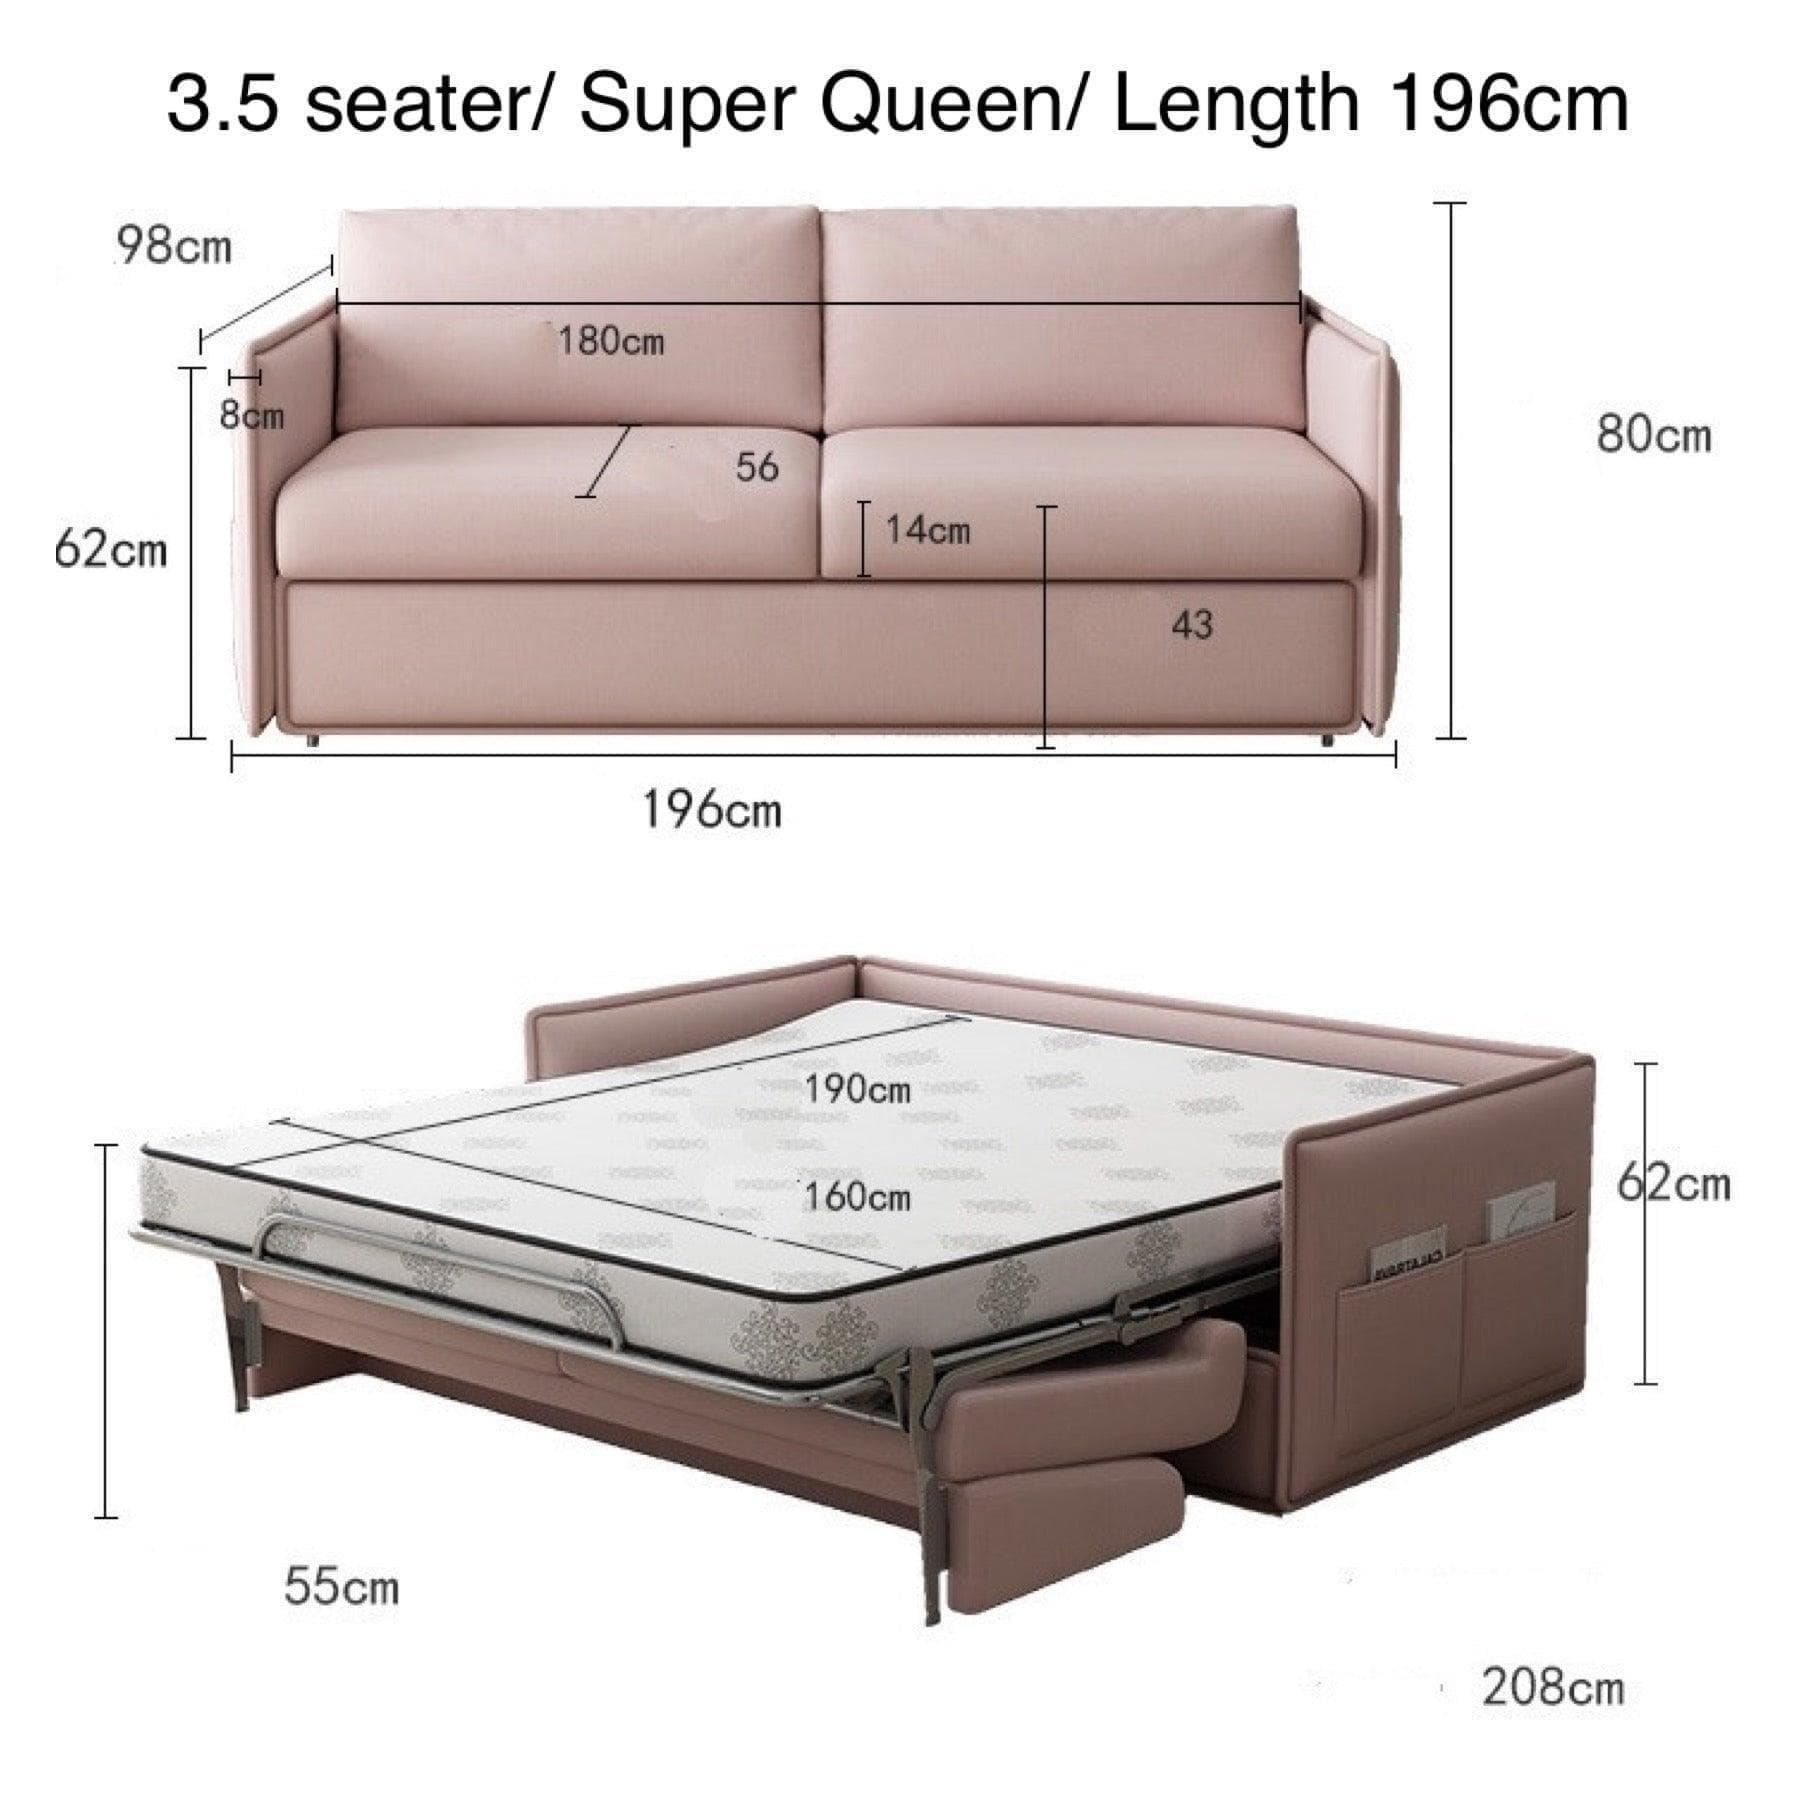 Home Atelier Cotton Linen Fabric / Super Queen Size/ Length 196cm / Pink Ariel Foldable Sofa Bed with Mattress